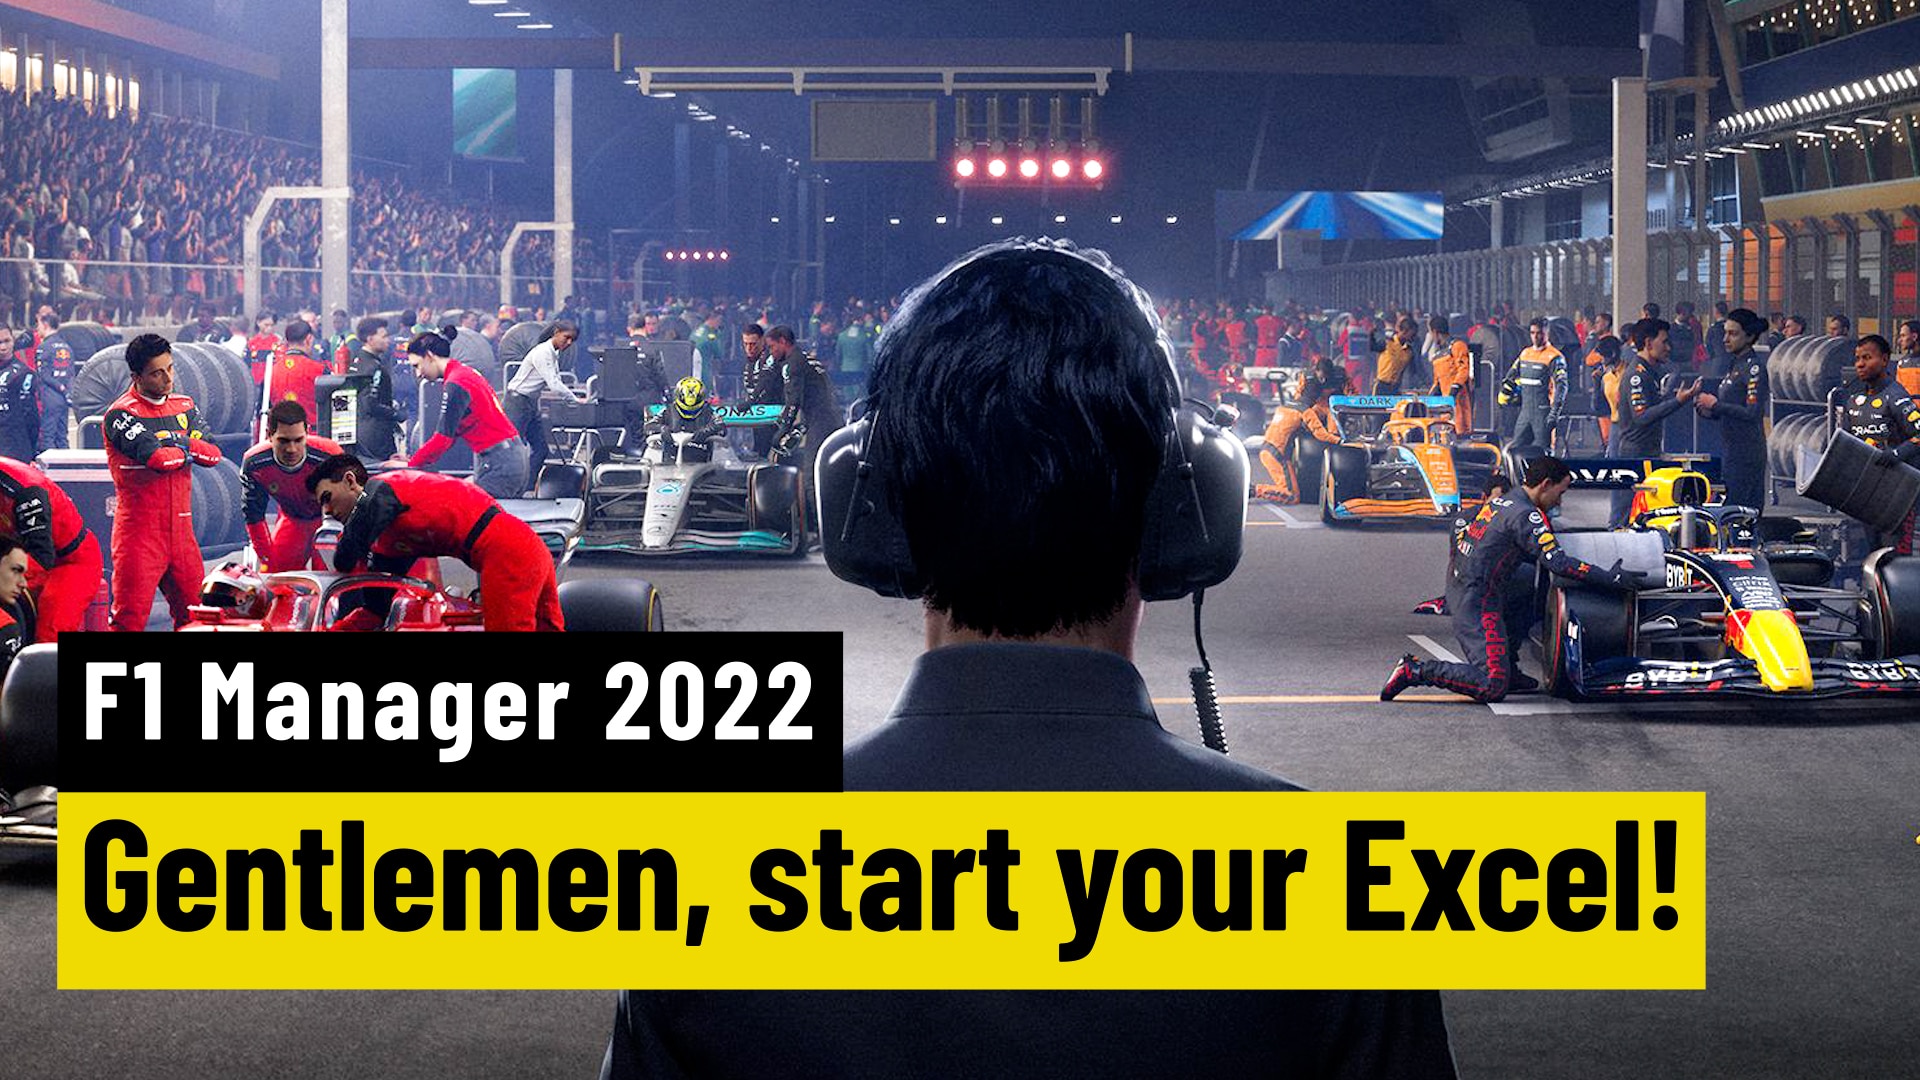 F1 Manager 2022: Exclusive insight into the Racing Manager